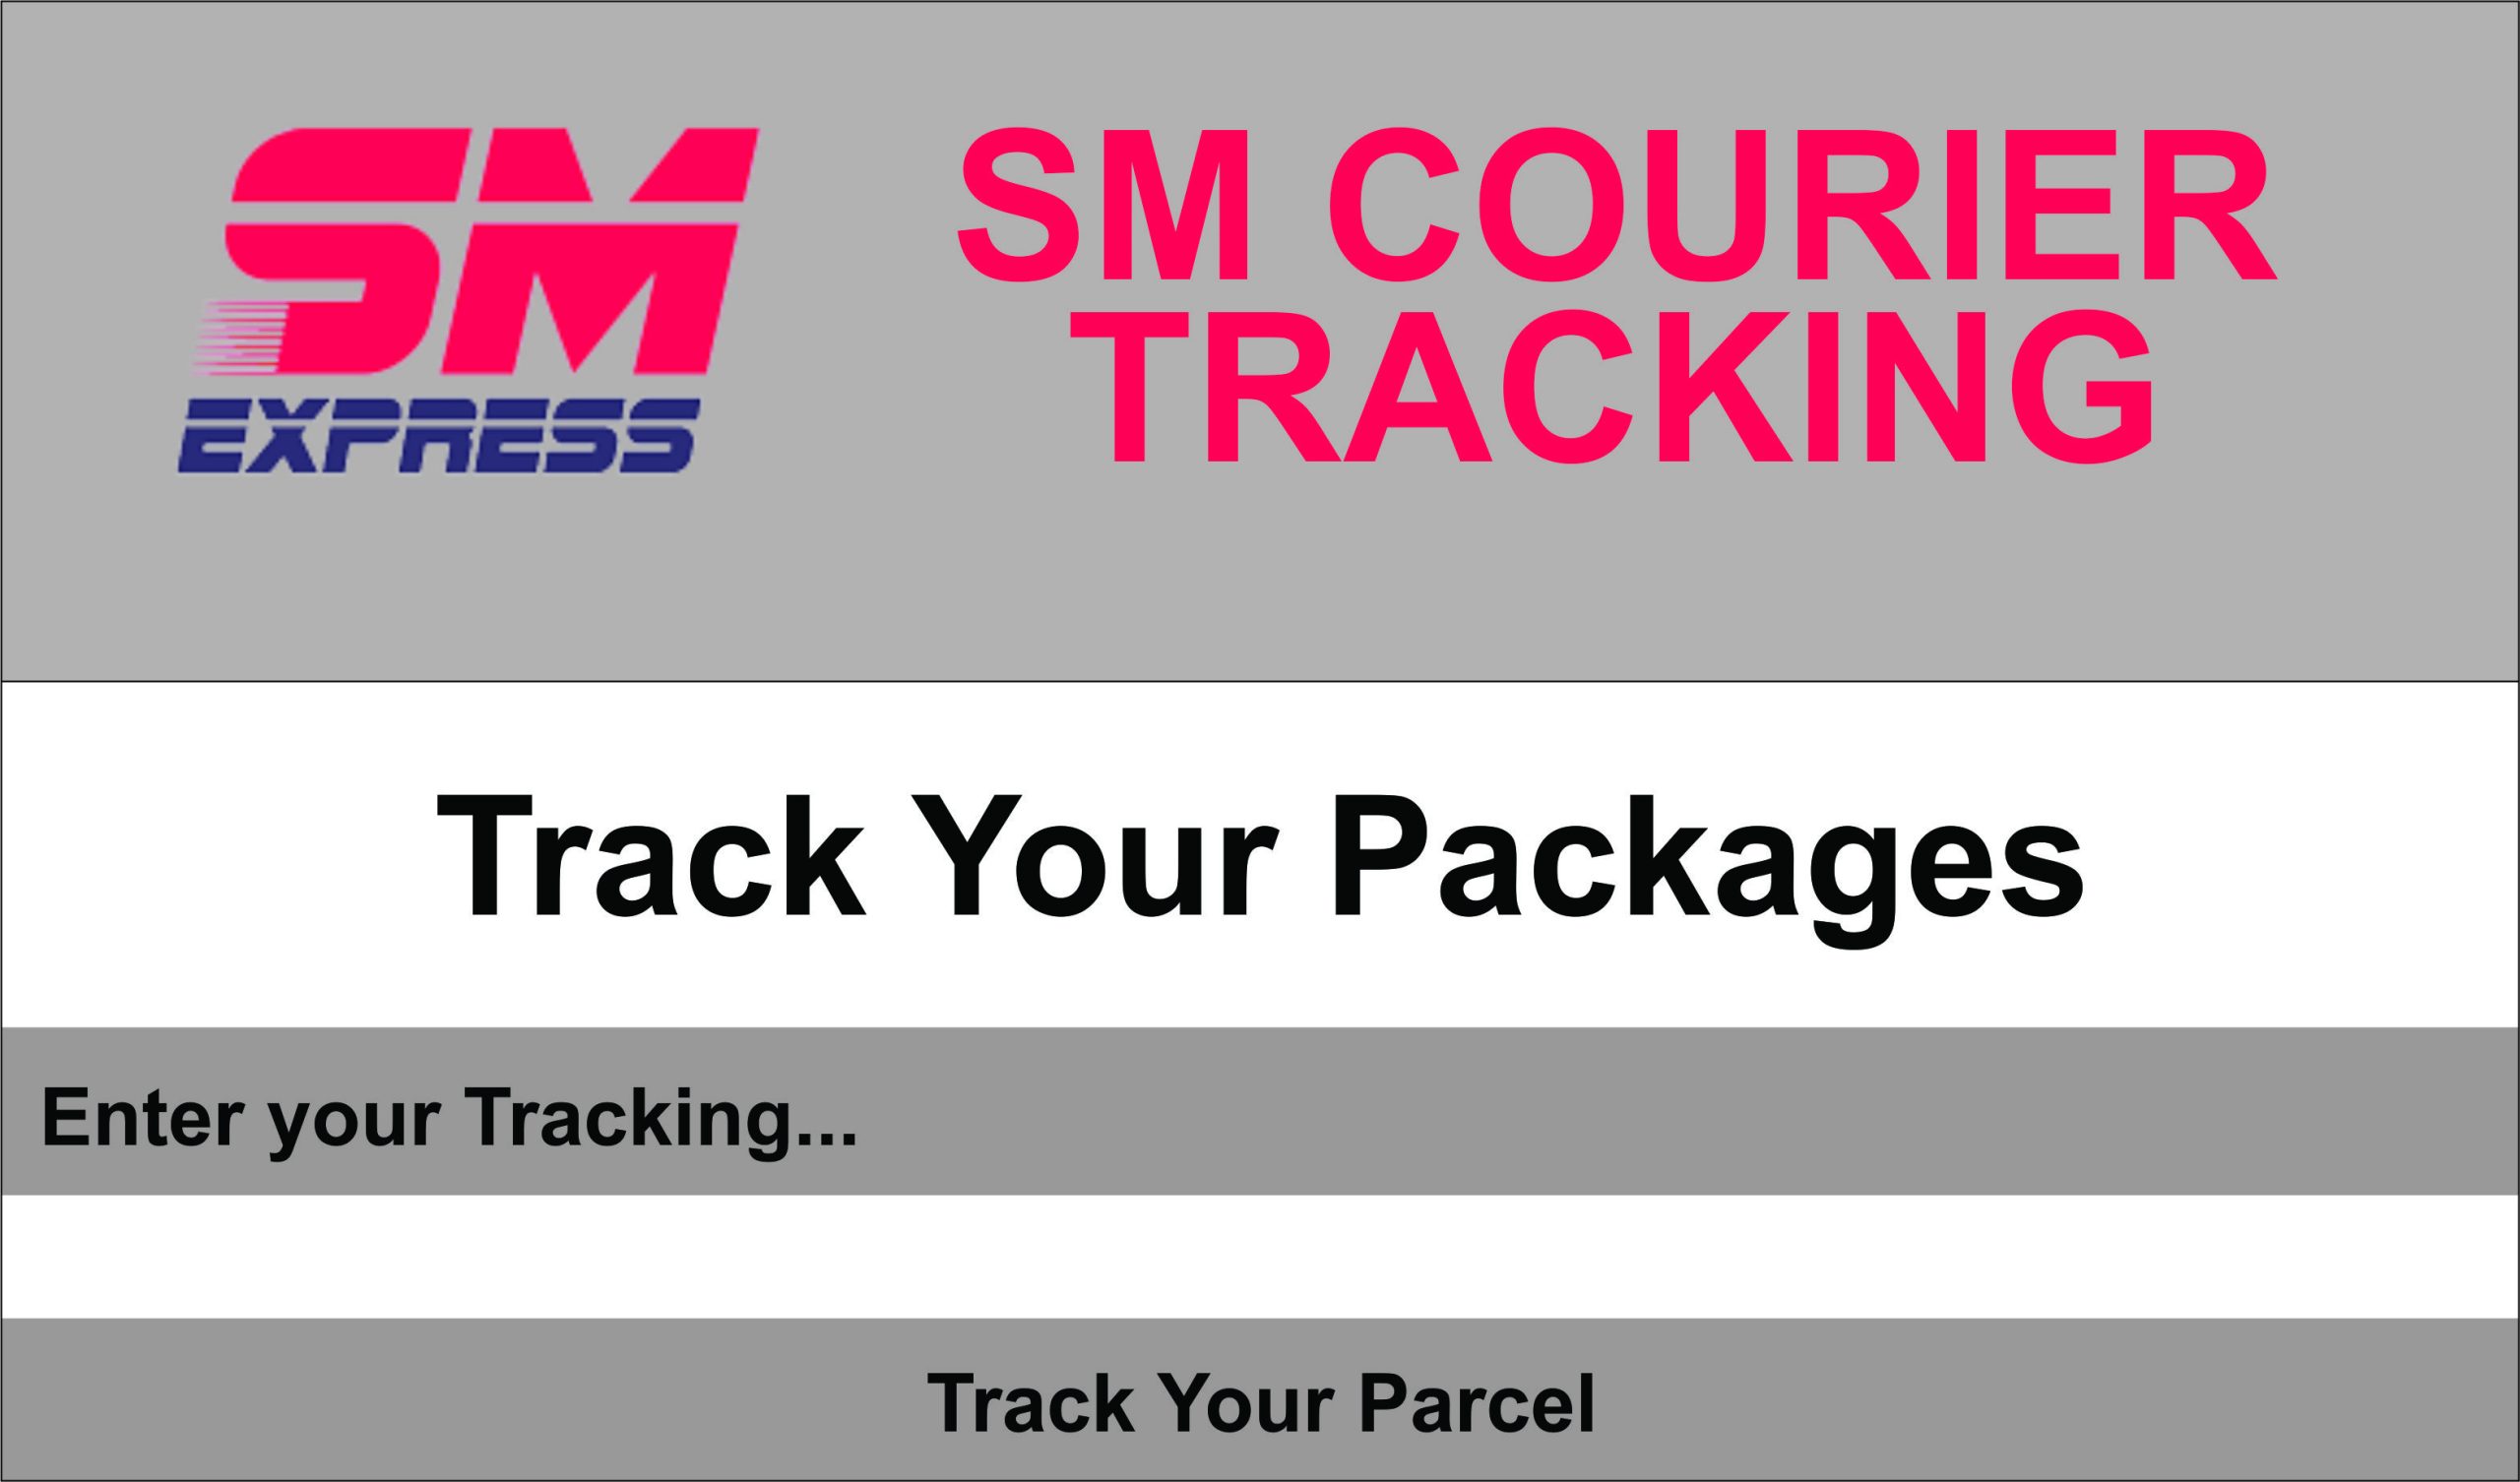 Parcel track your GLOBAL PACKAGE